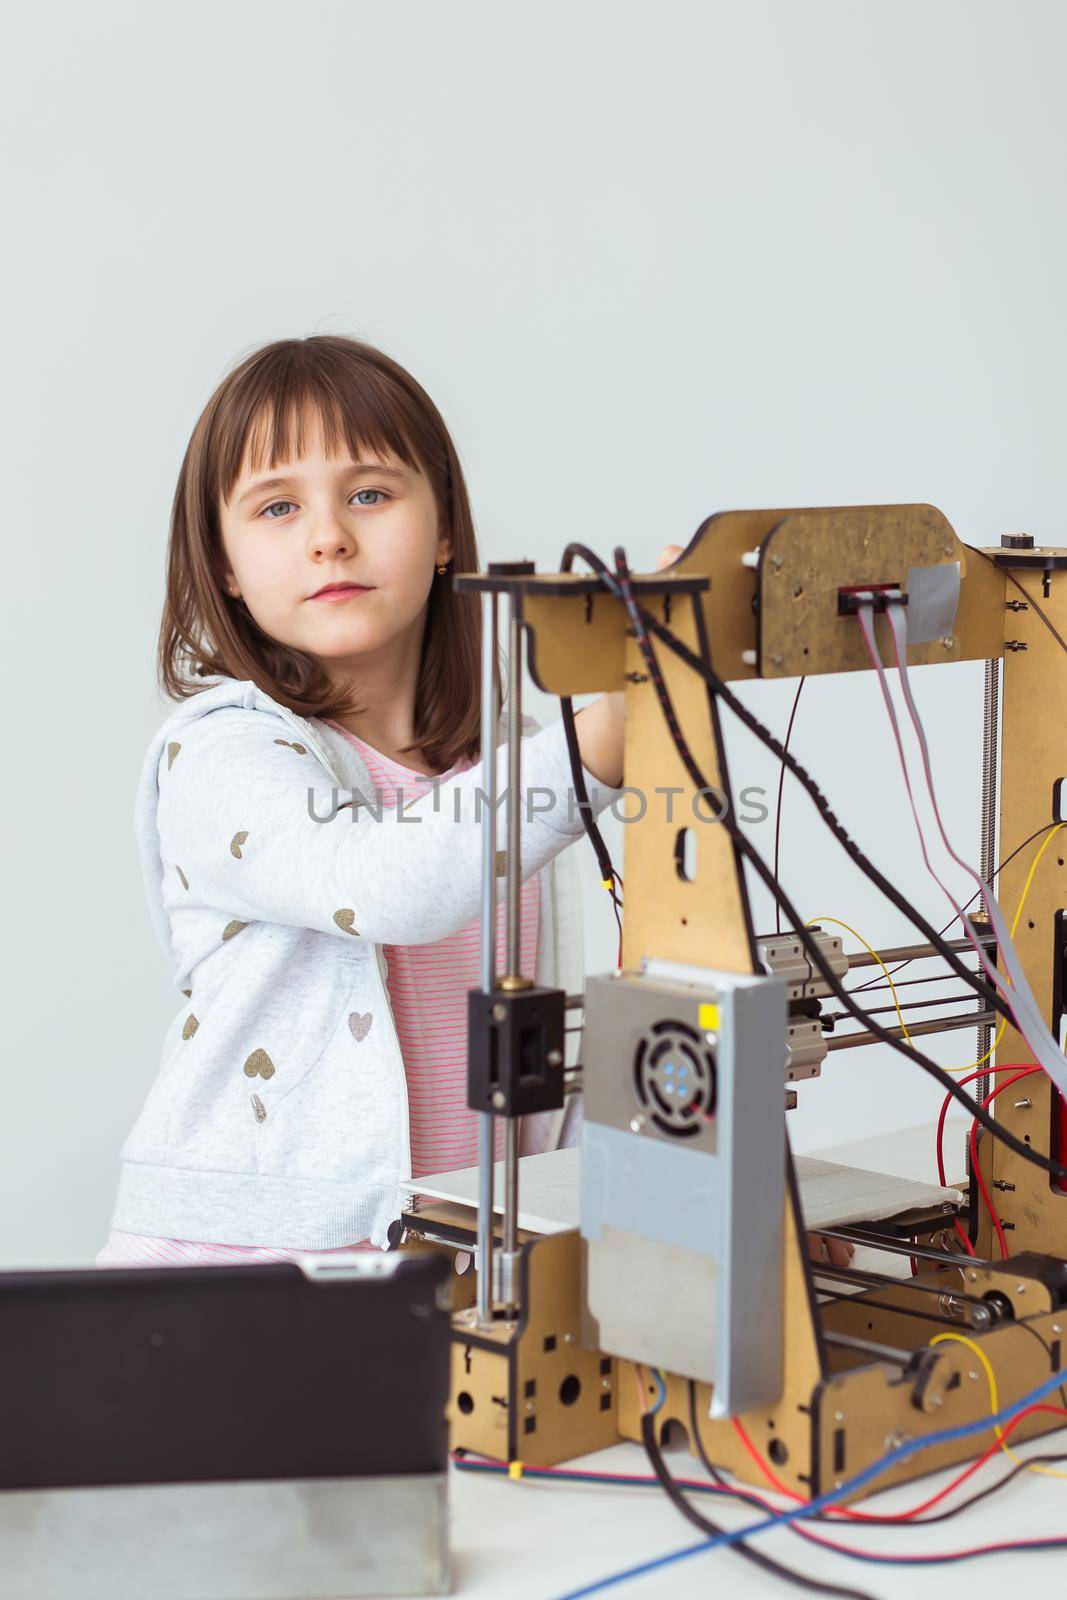 Cute girl with 3d printed shutter shades is watching her 3d printer as it prints her 3d model. by Satura86